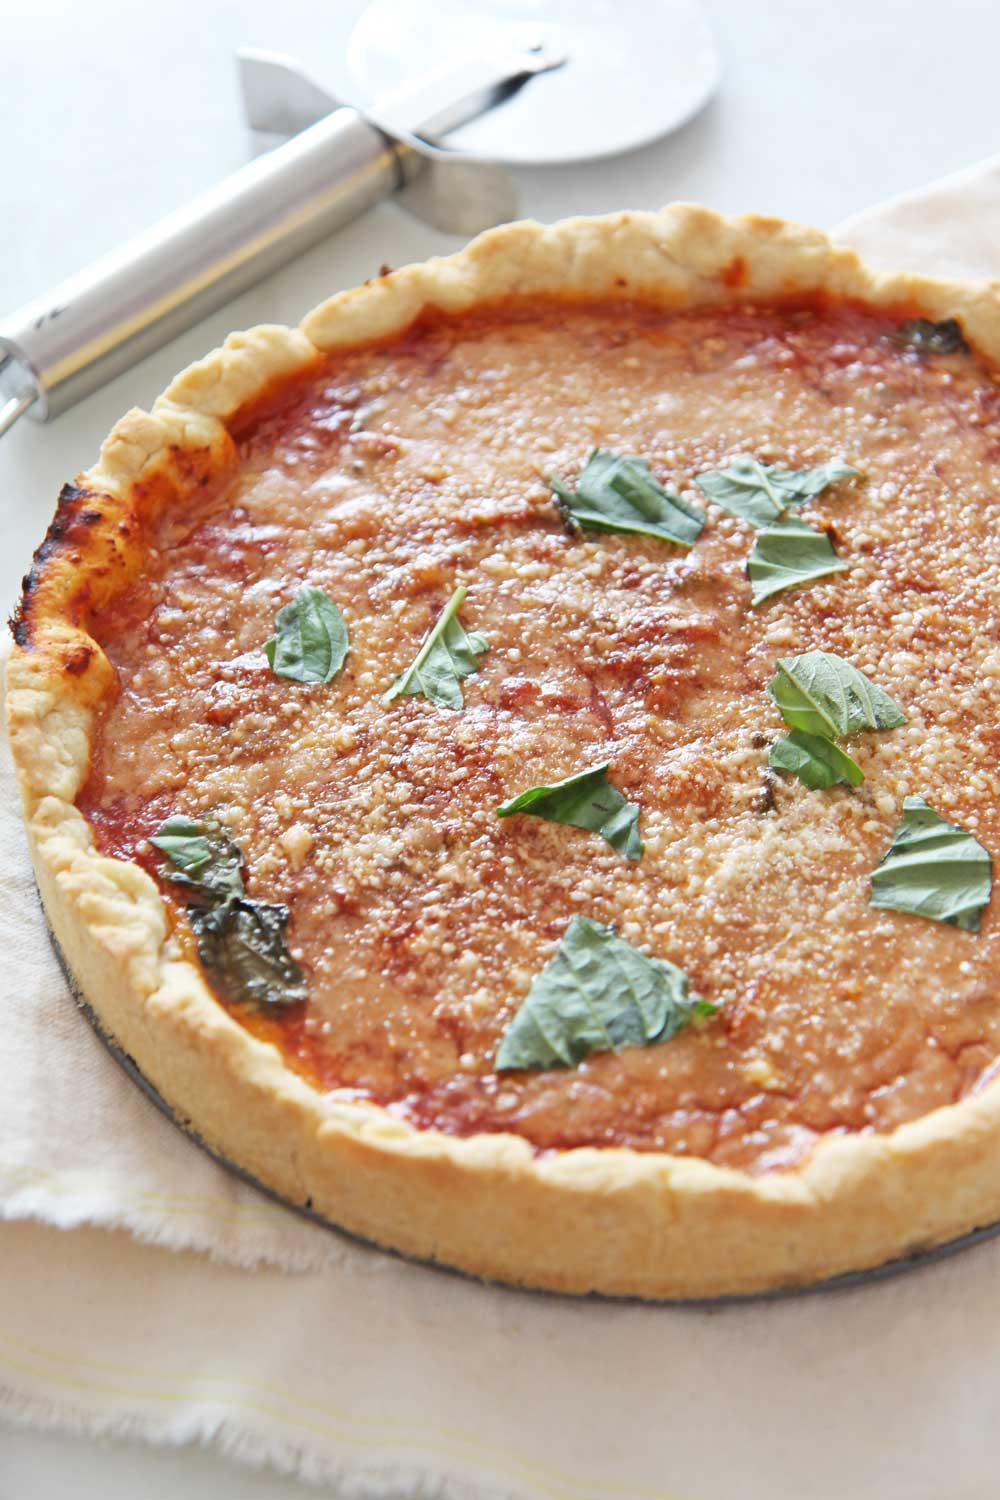 How To Make Deep Dish Pizza. The perfect deep dish pizza recipe uses pie dough as the crust, sweet marinara sauce, and lots of salami. This is an easy weeknight recipe for busy families. Happy Cooking! www.Chophappy.com #deepdishpizza #pizzarecipe